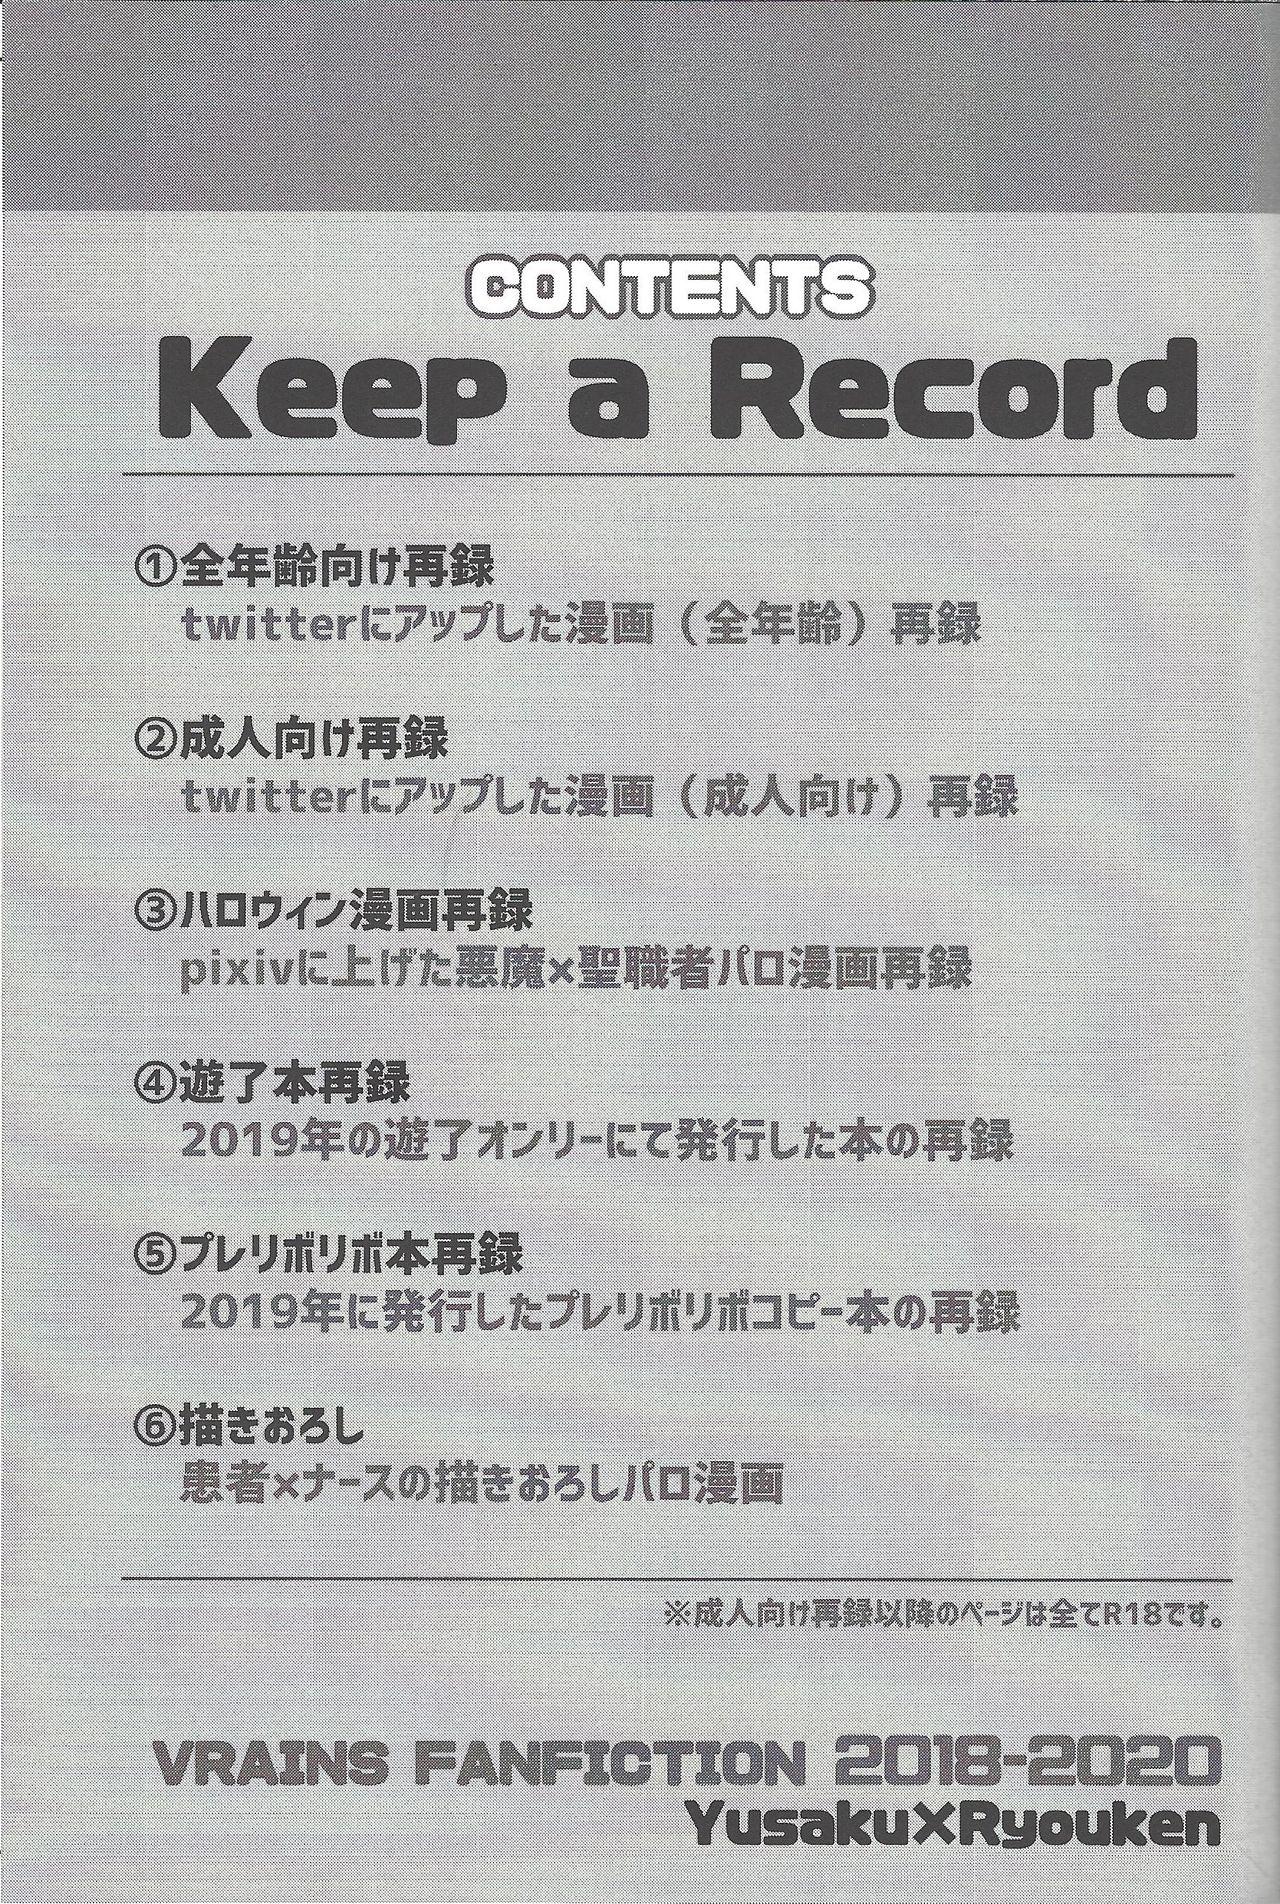 Keep a Record 1